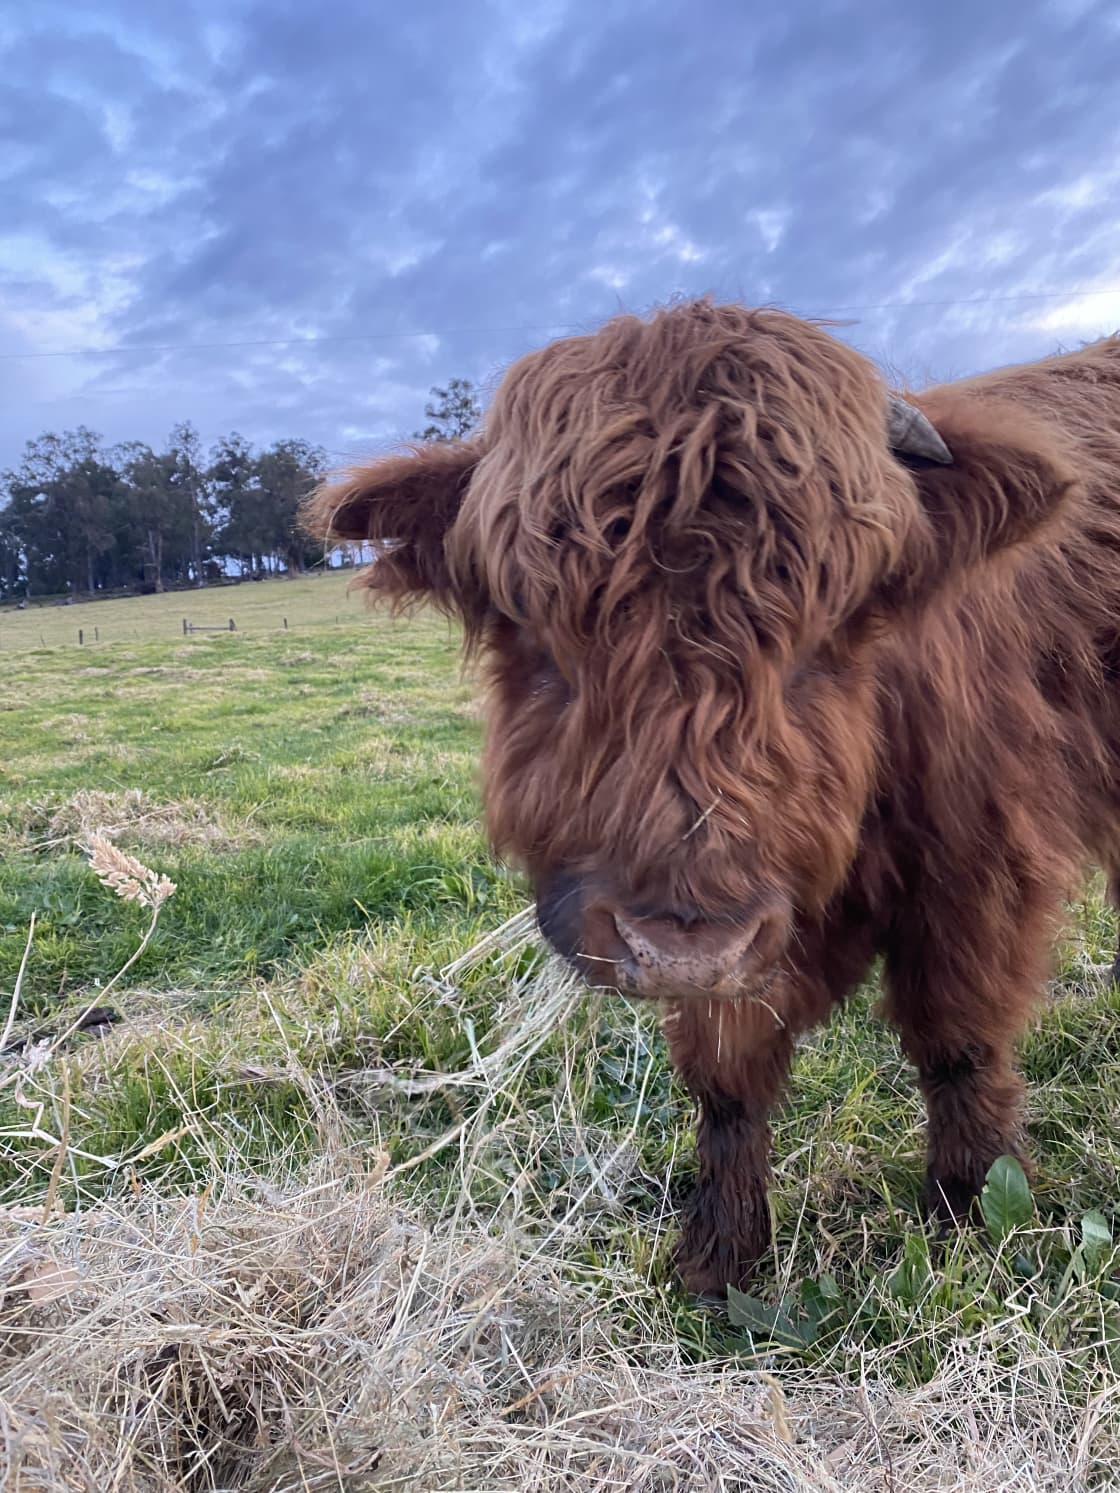 Teddy, our Scottish Highland bull, in closeup.